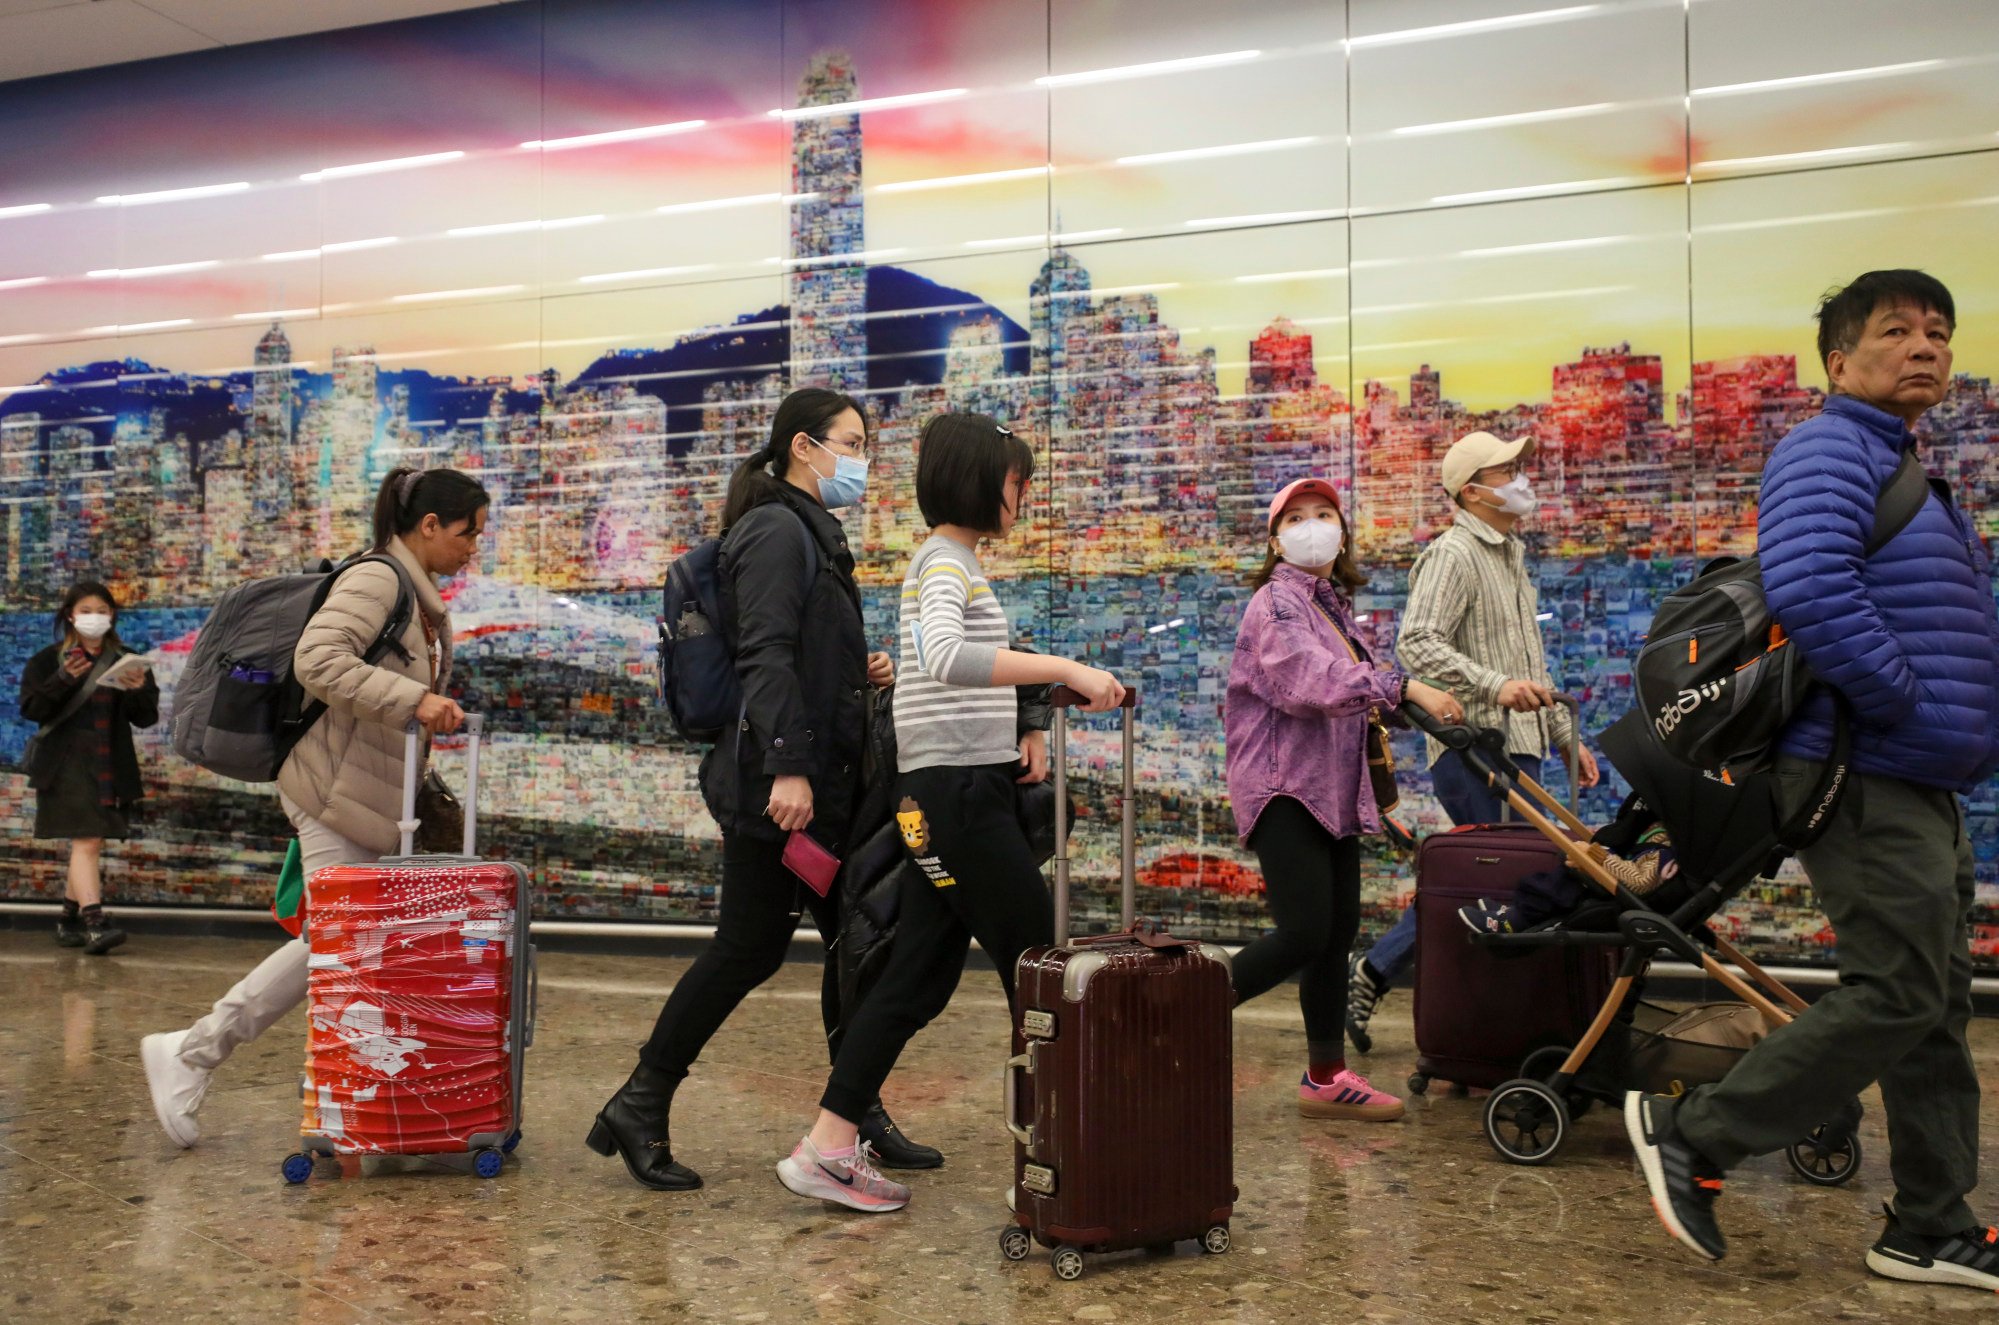 Mainland Chinese make only day trips to Hong Kong as city loses allure